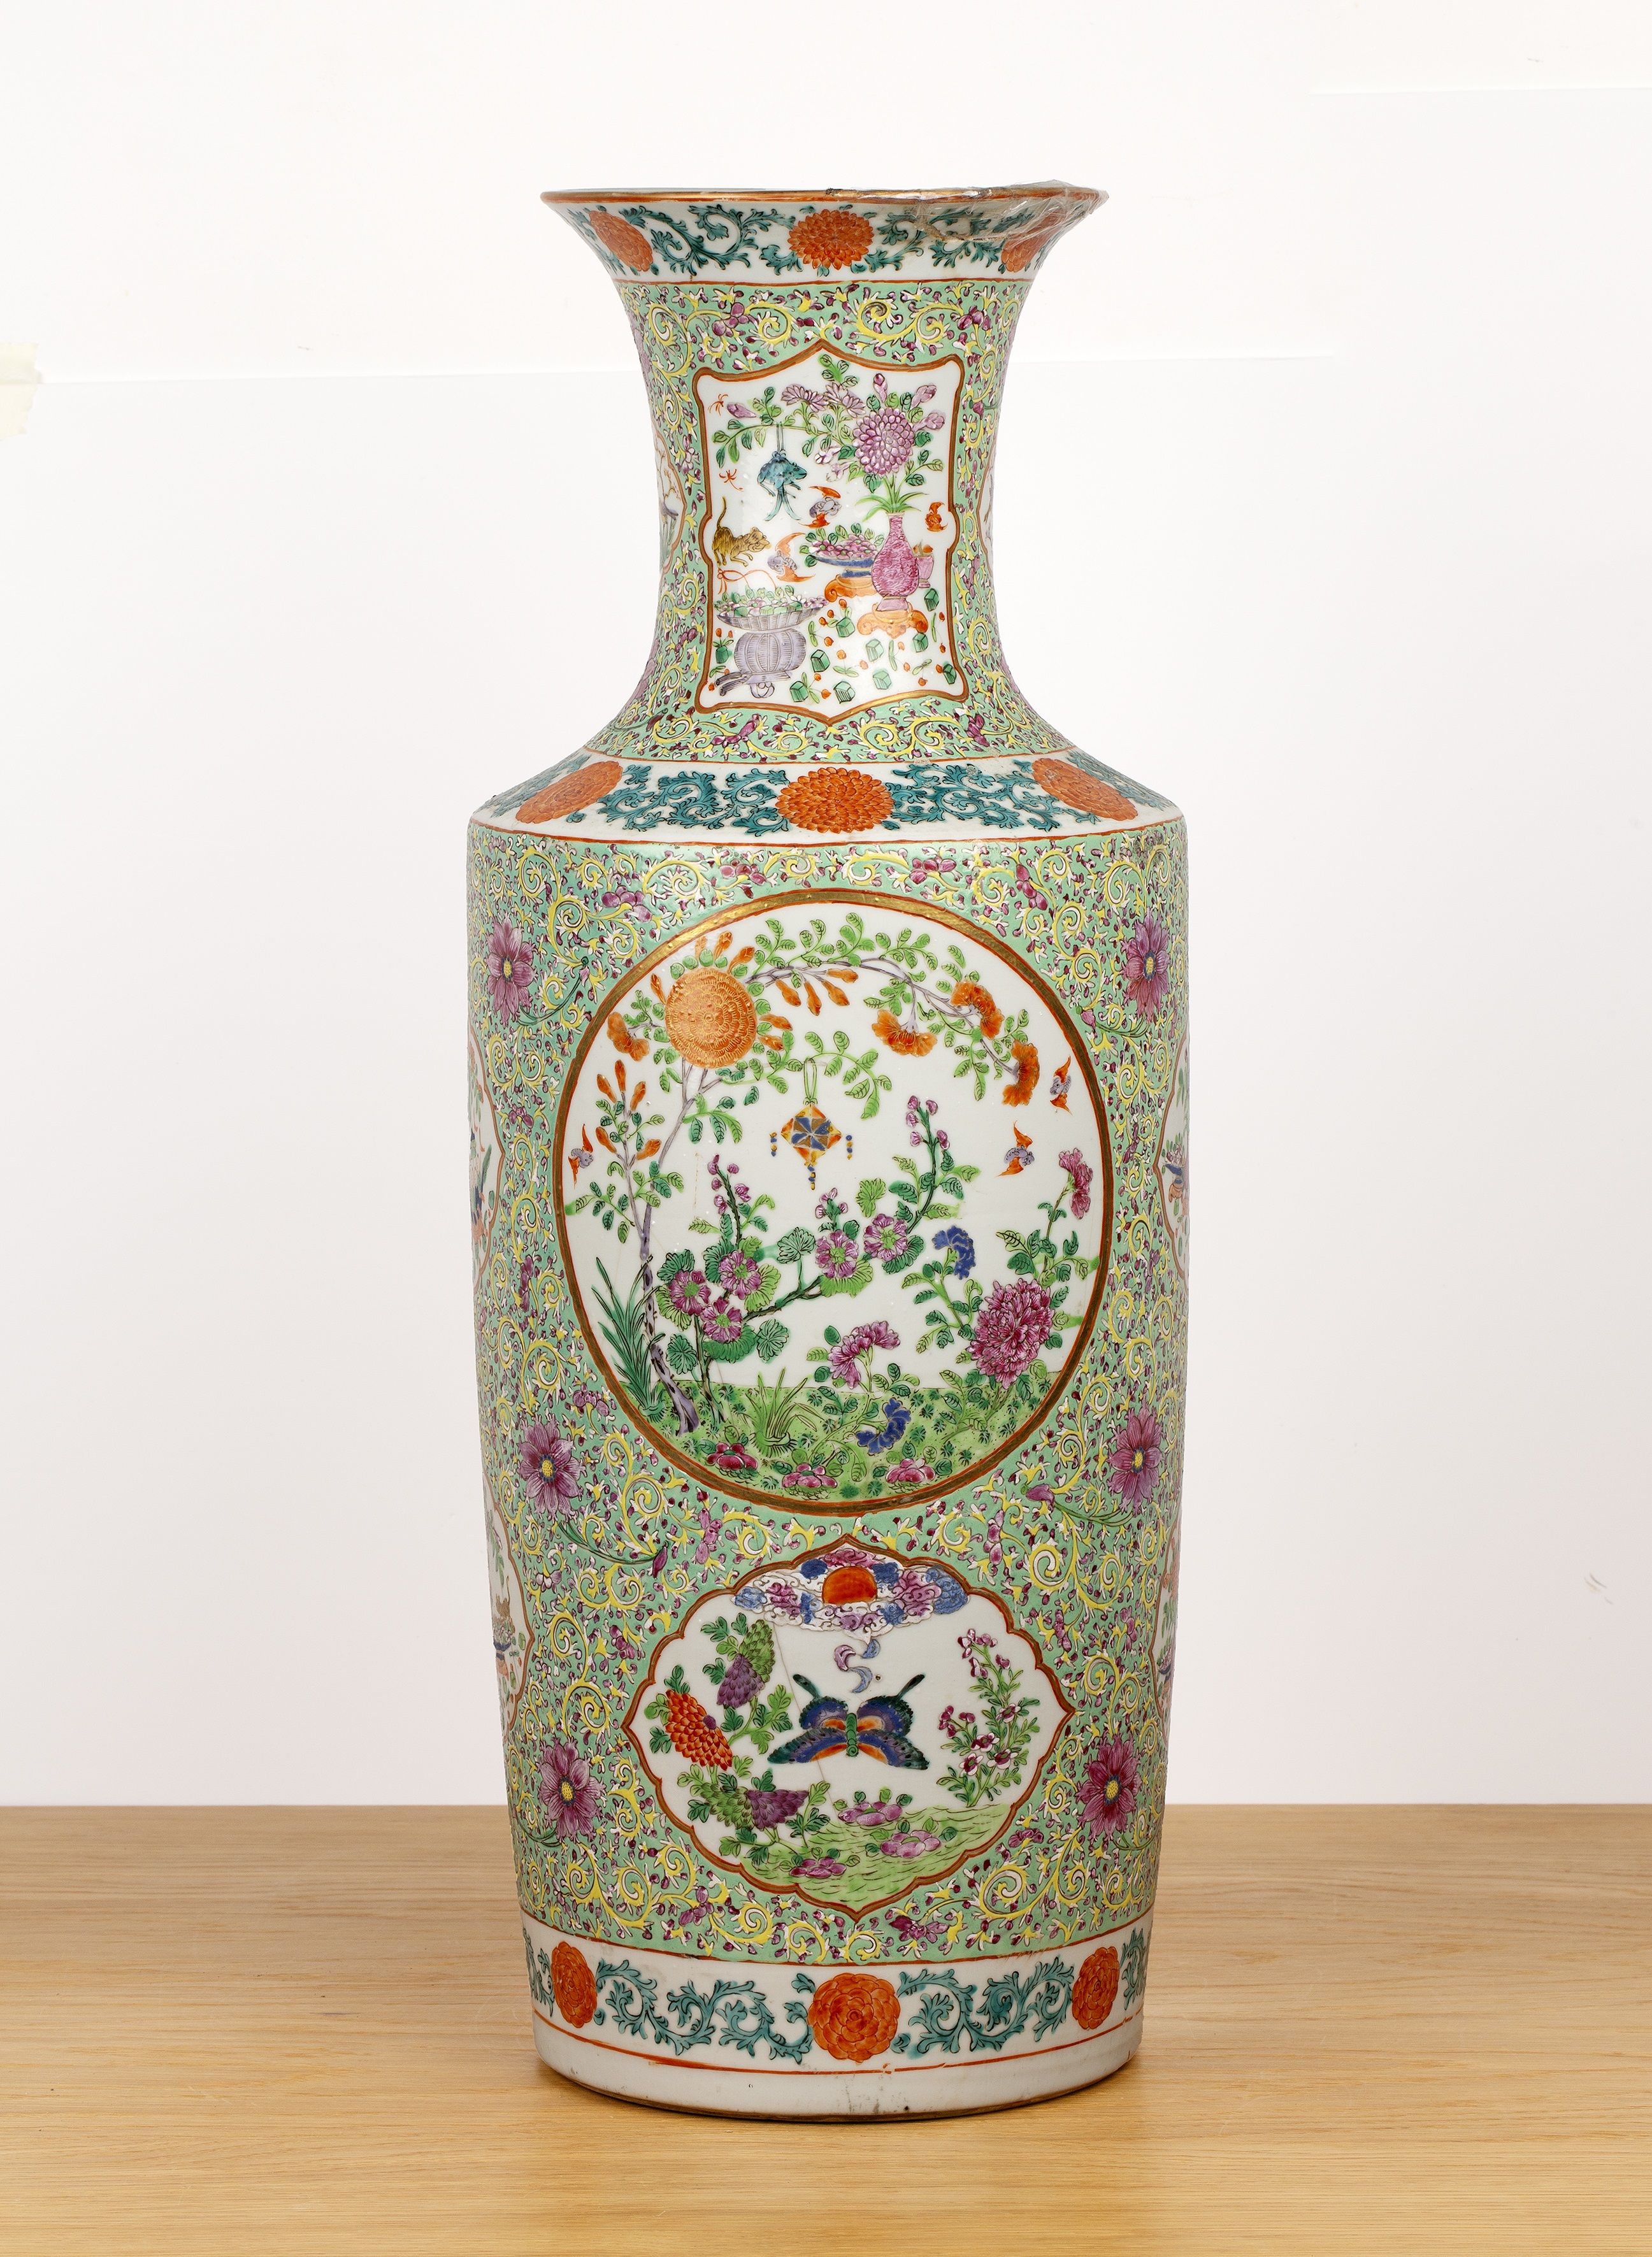 Large famille verte porcelain vase Chinese, 19th Century painted with panels of cockerels, flowers - Image 3 of 6